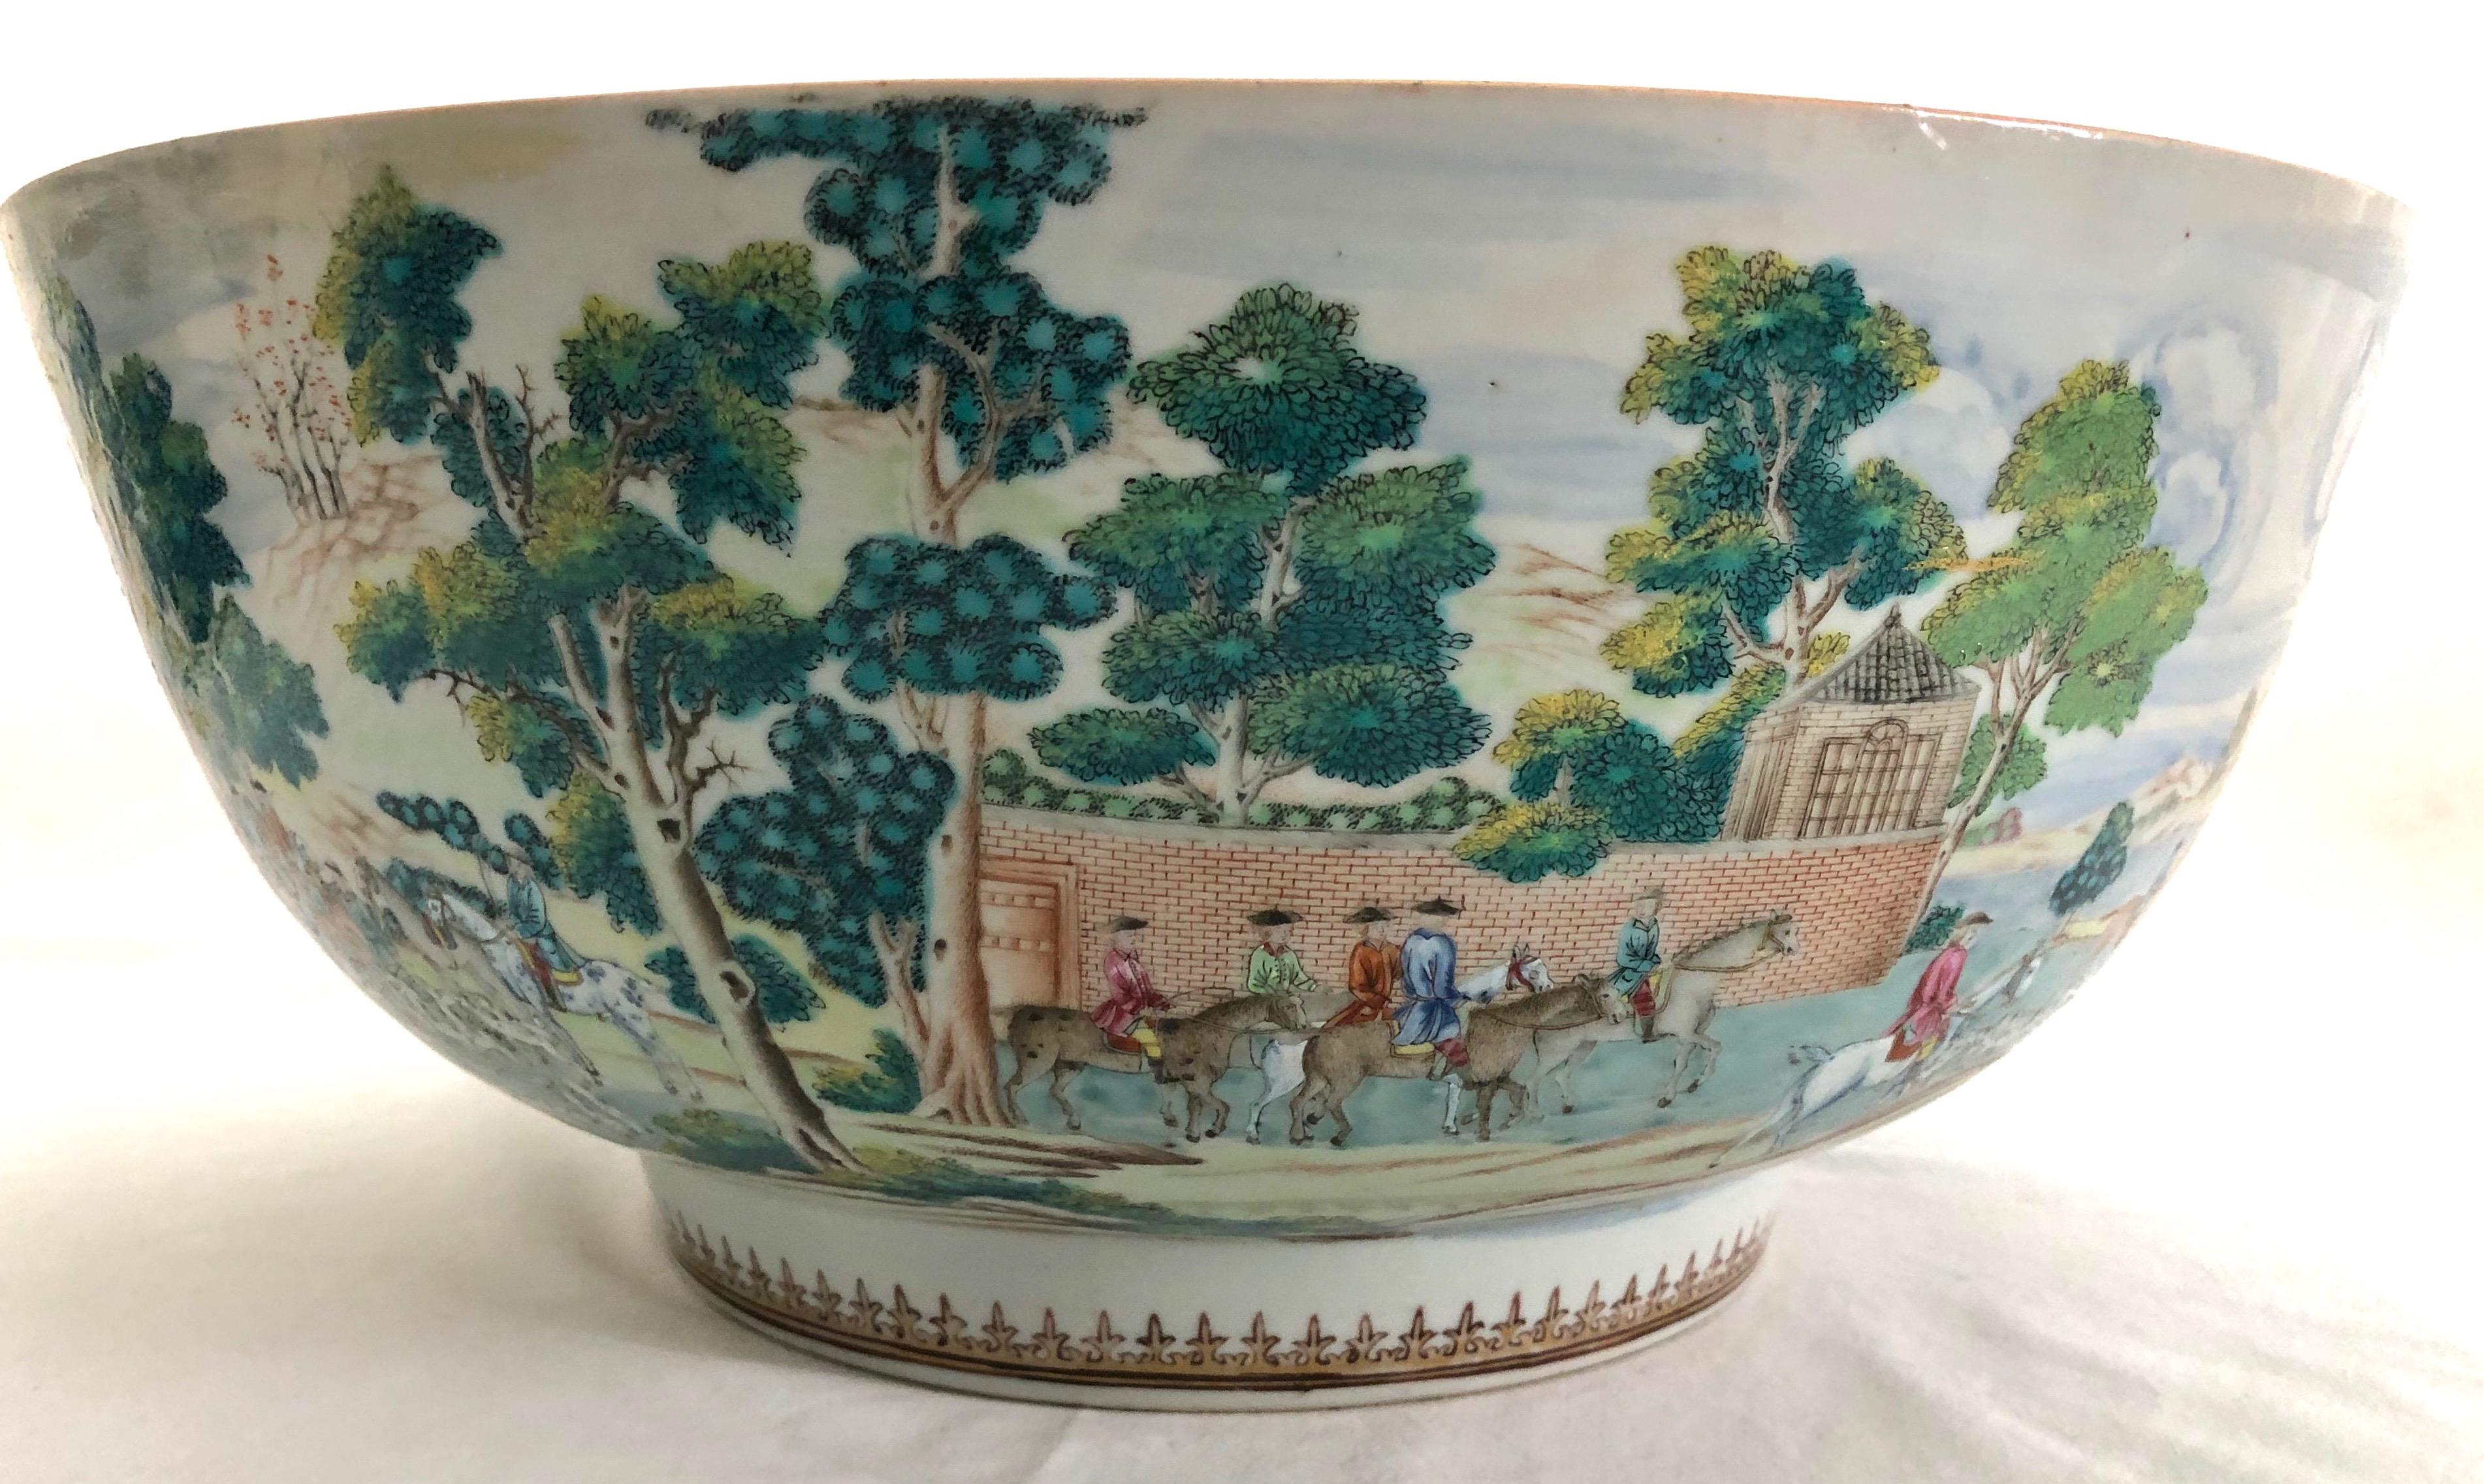 A very fine and rare Chinese export large porcelain punch bowl with extremely detailed, continuous english fox hunt scenic decoration. The interior having a gilt swag rim border above a central English horse and rider pictorial, all resting on a rim